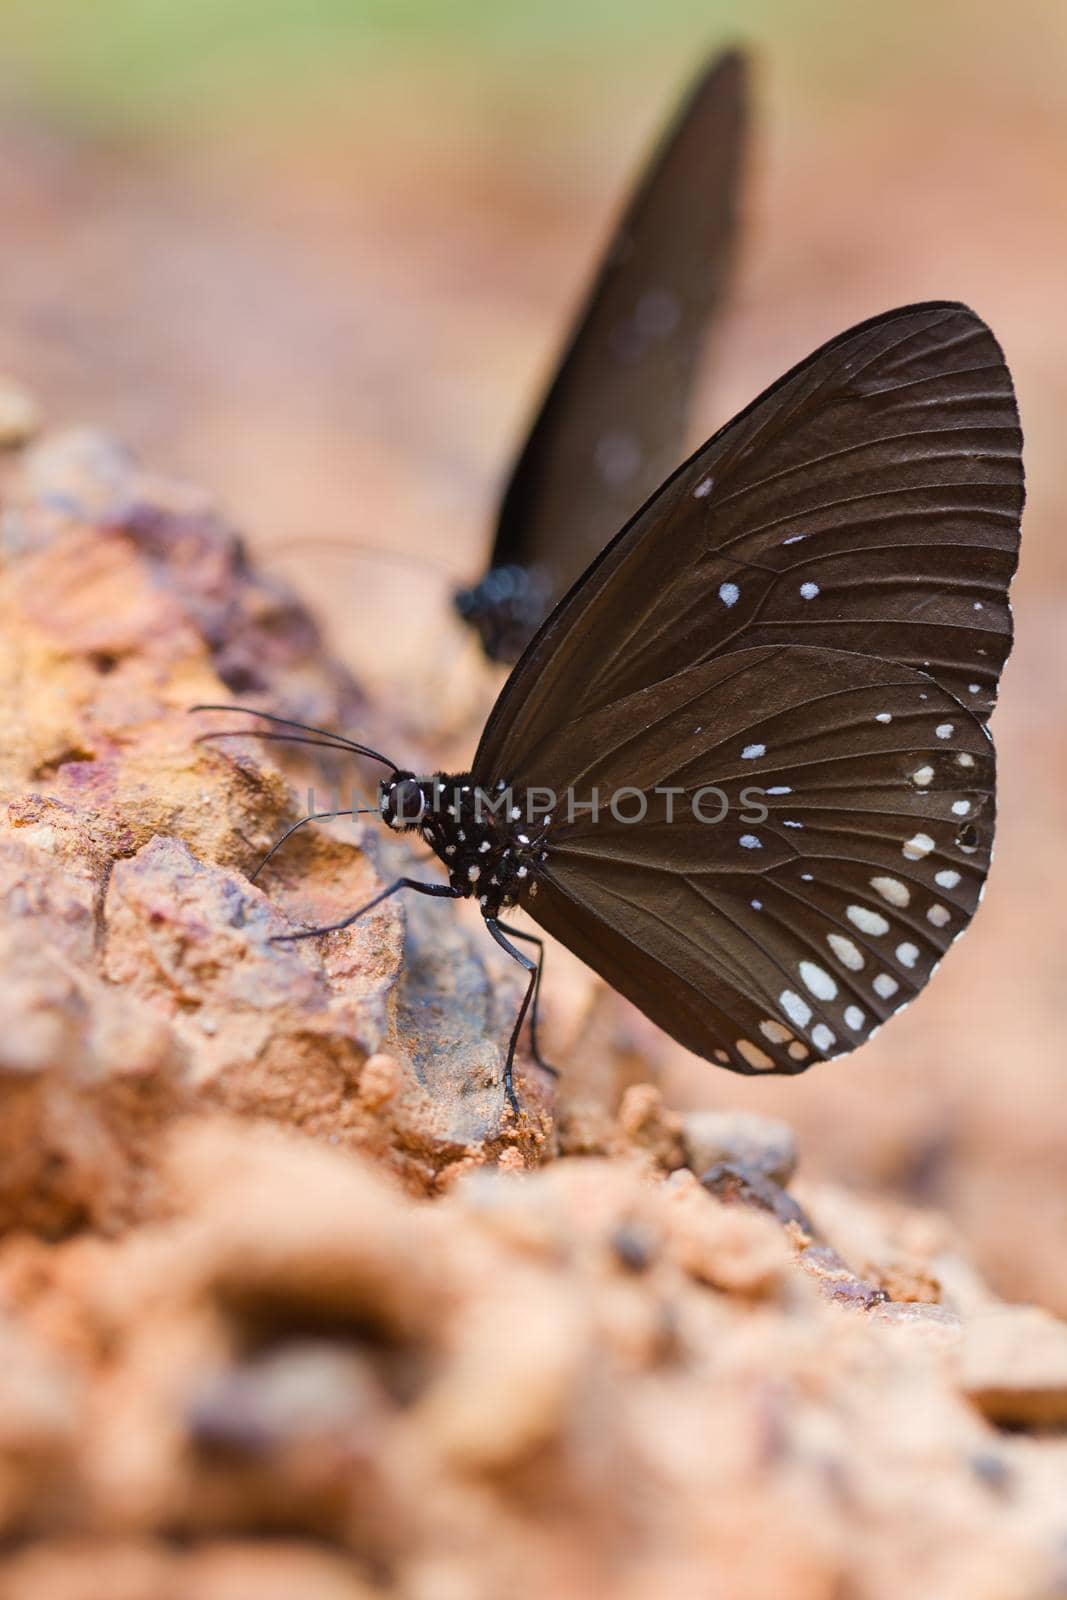 The Butterfly "Common Crown" eaten mineral on sand. by jayzynism